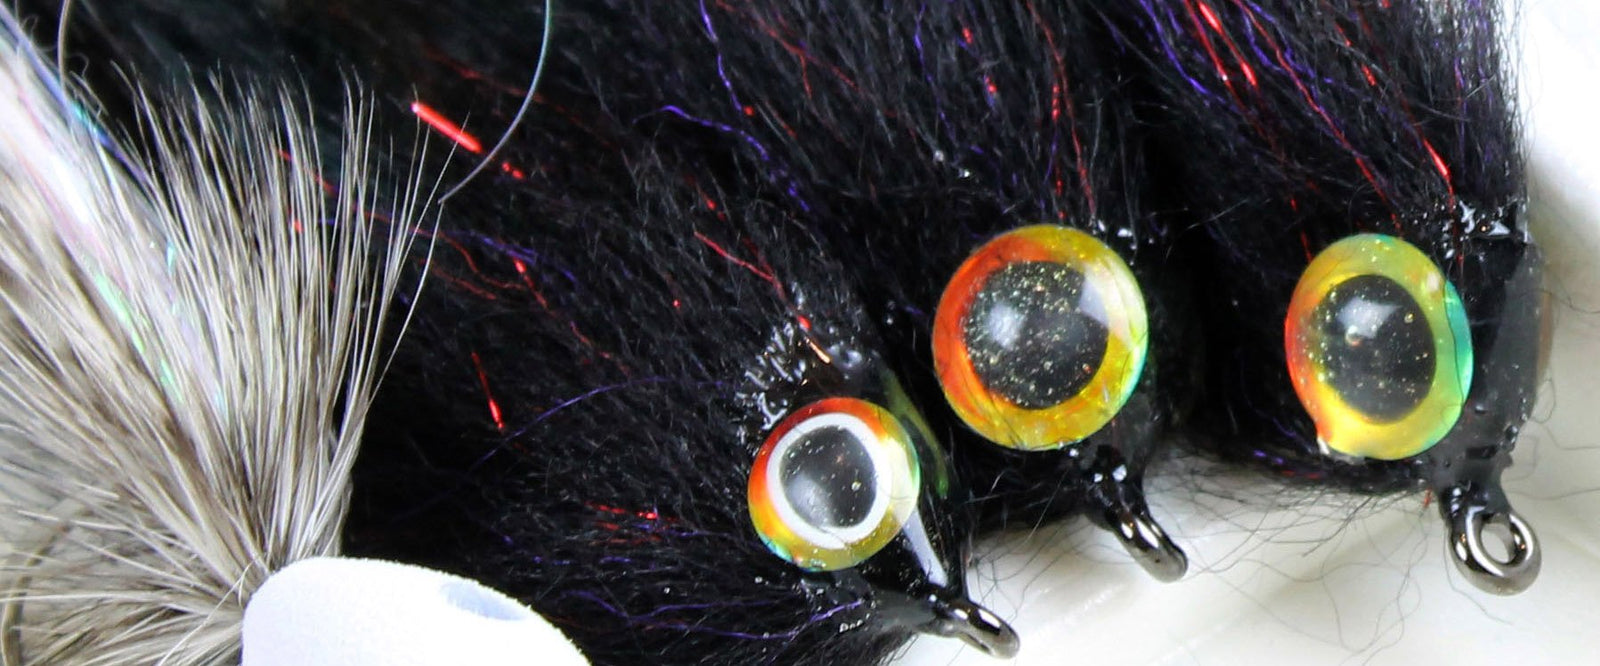  The Fly Fishing Place Godzilla Hopper Trout Flies - Yellow  High Visibility Grasshopper or Stonefly Dry Fly - 6 Flies Hook Size 10 :  Sports & Outdoors